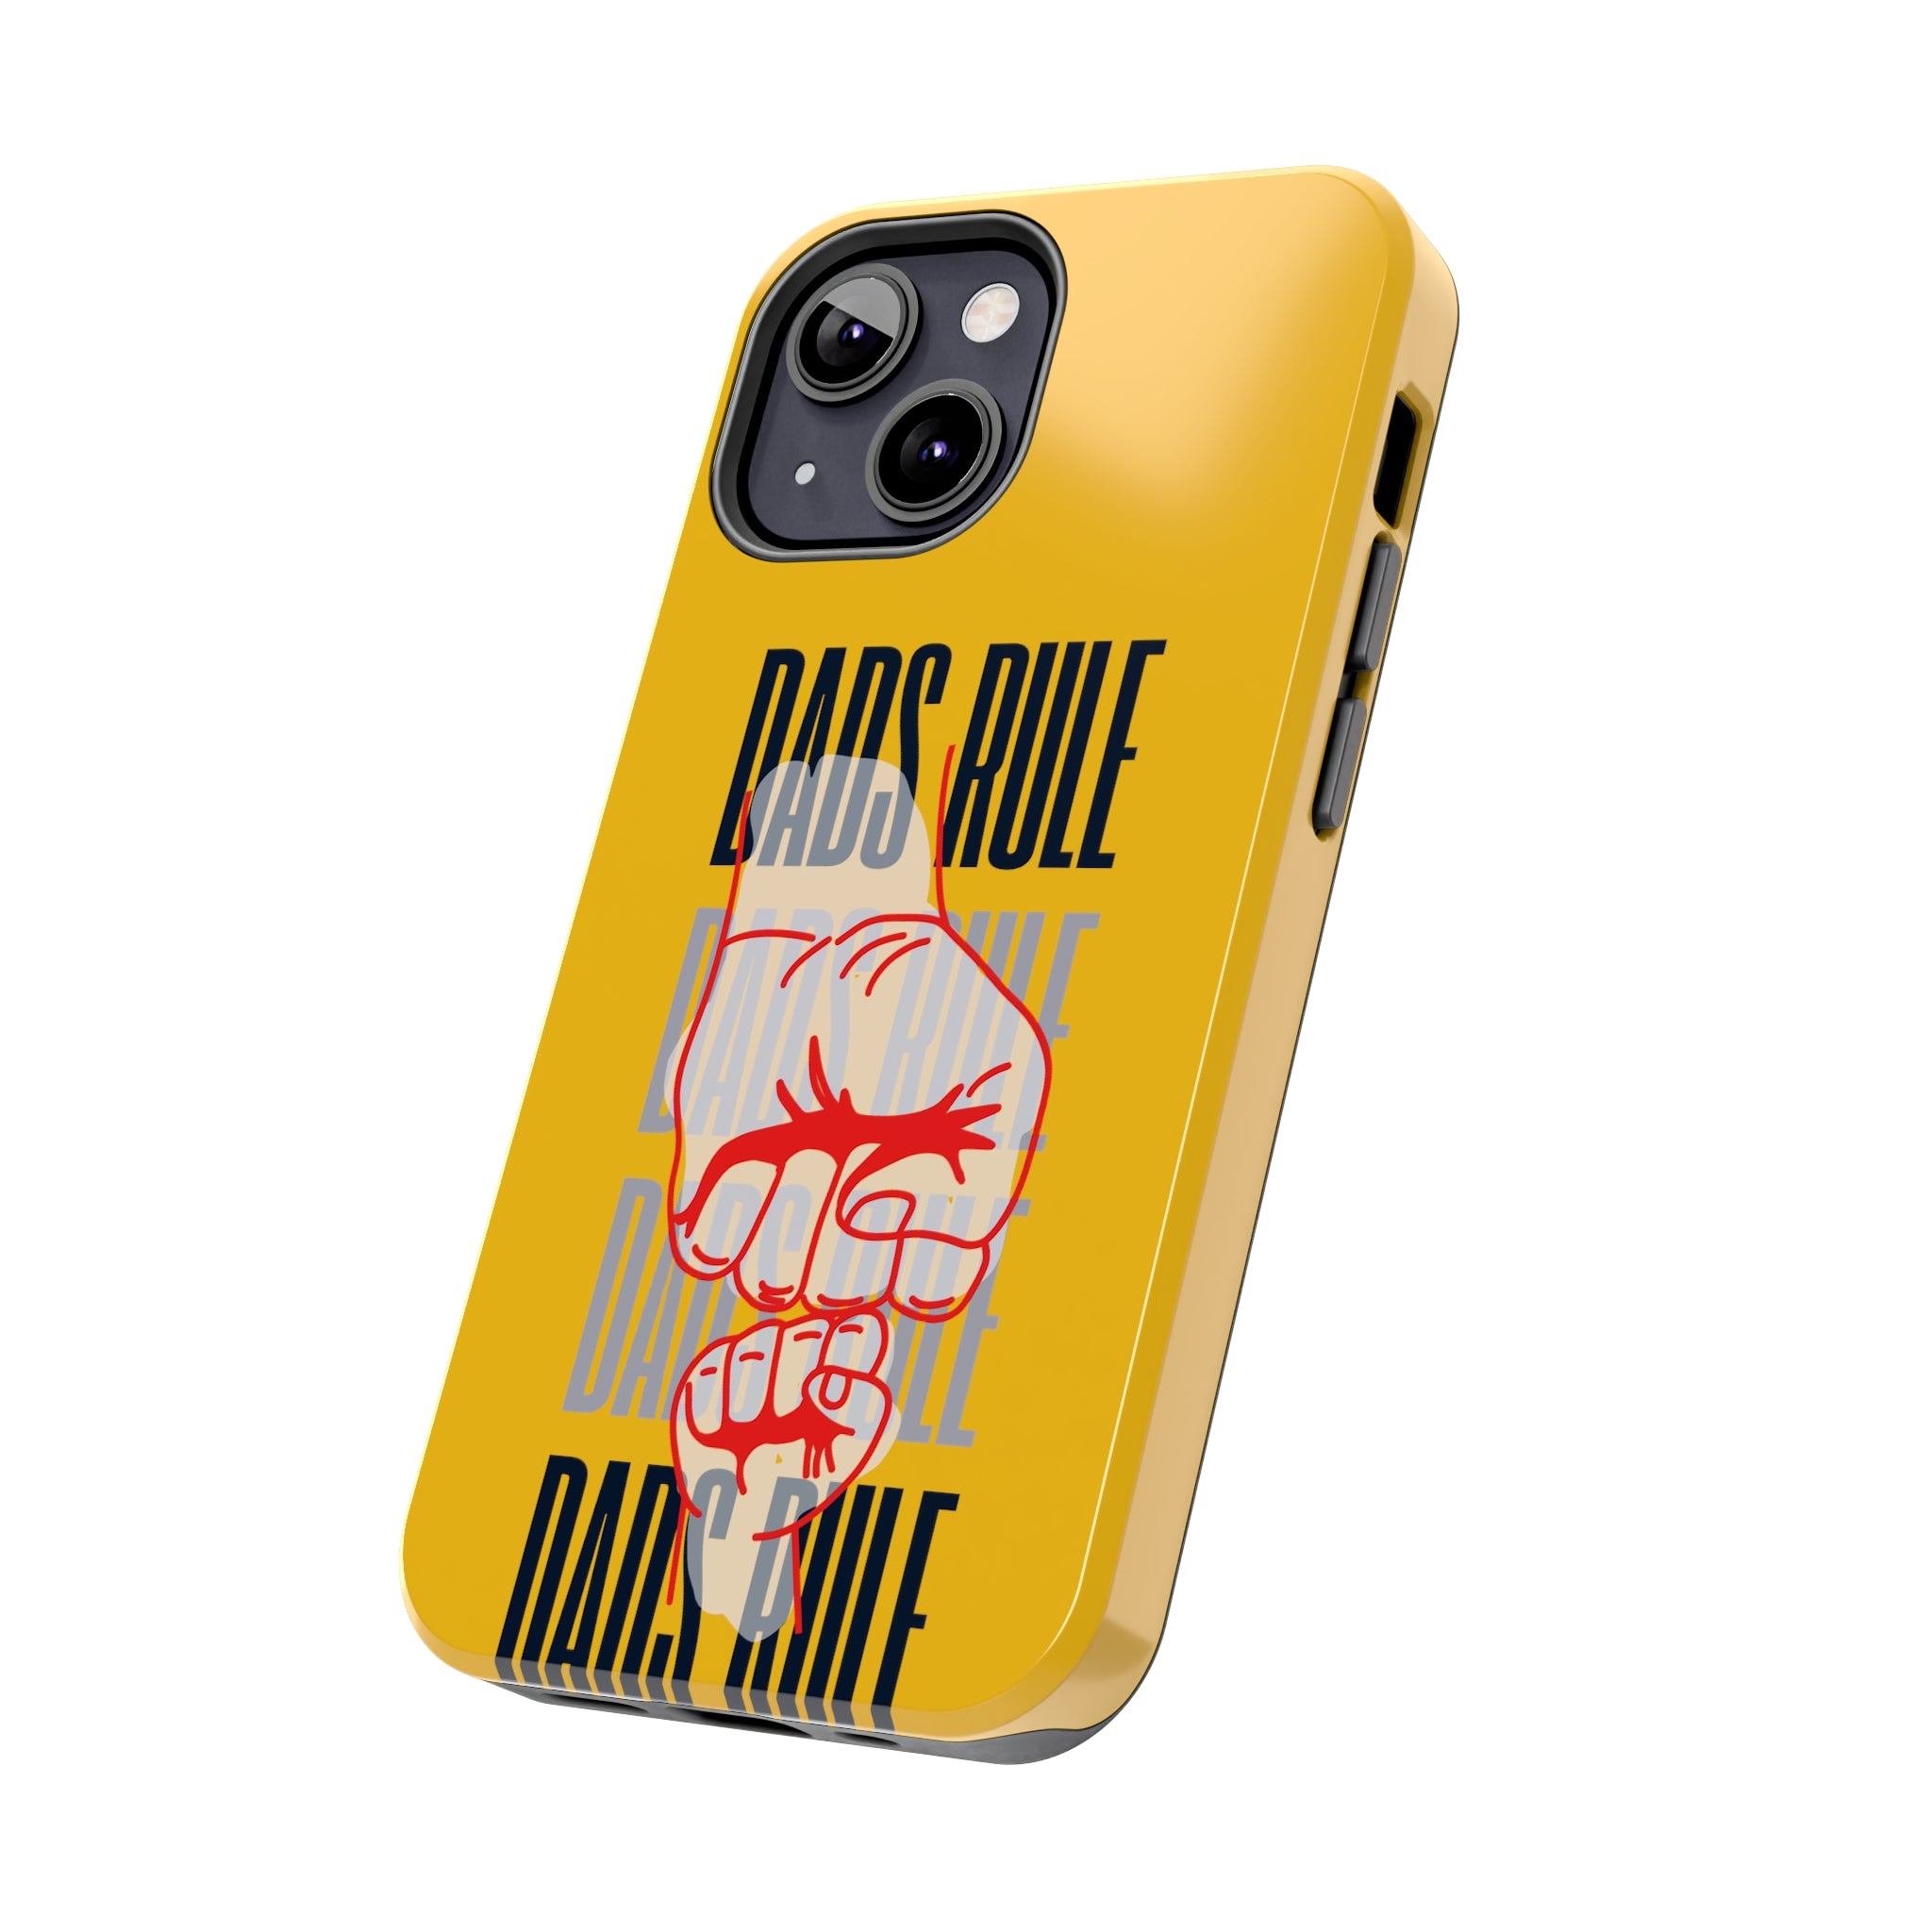 Dads Rule | iPhone 12 13 & 14 Phone Case